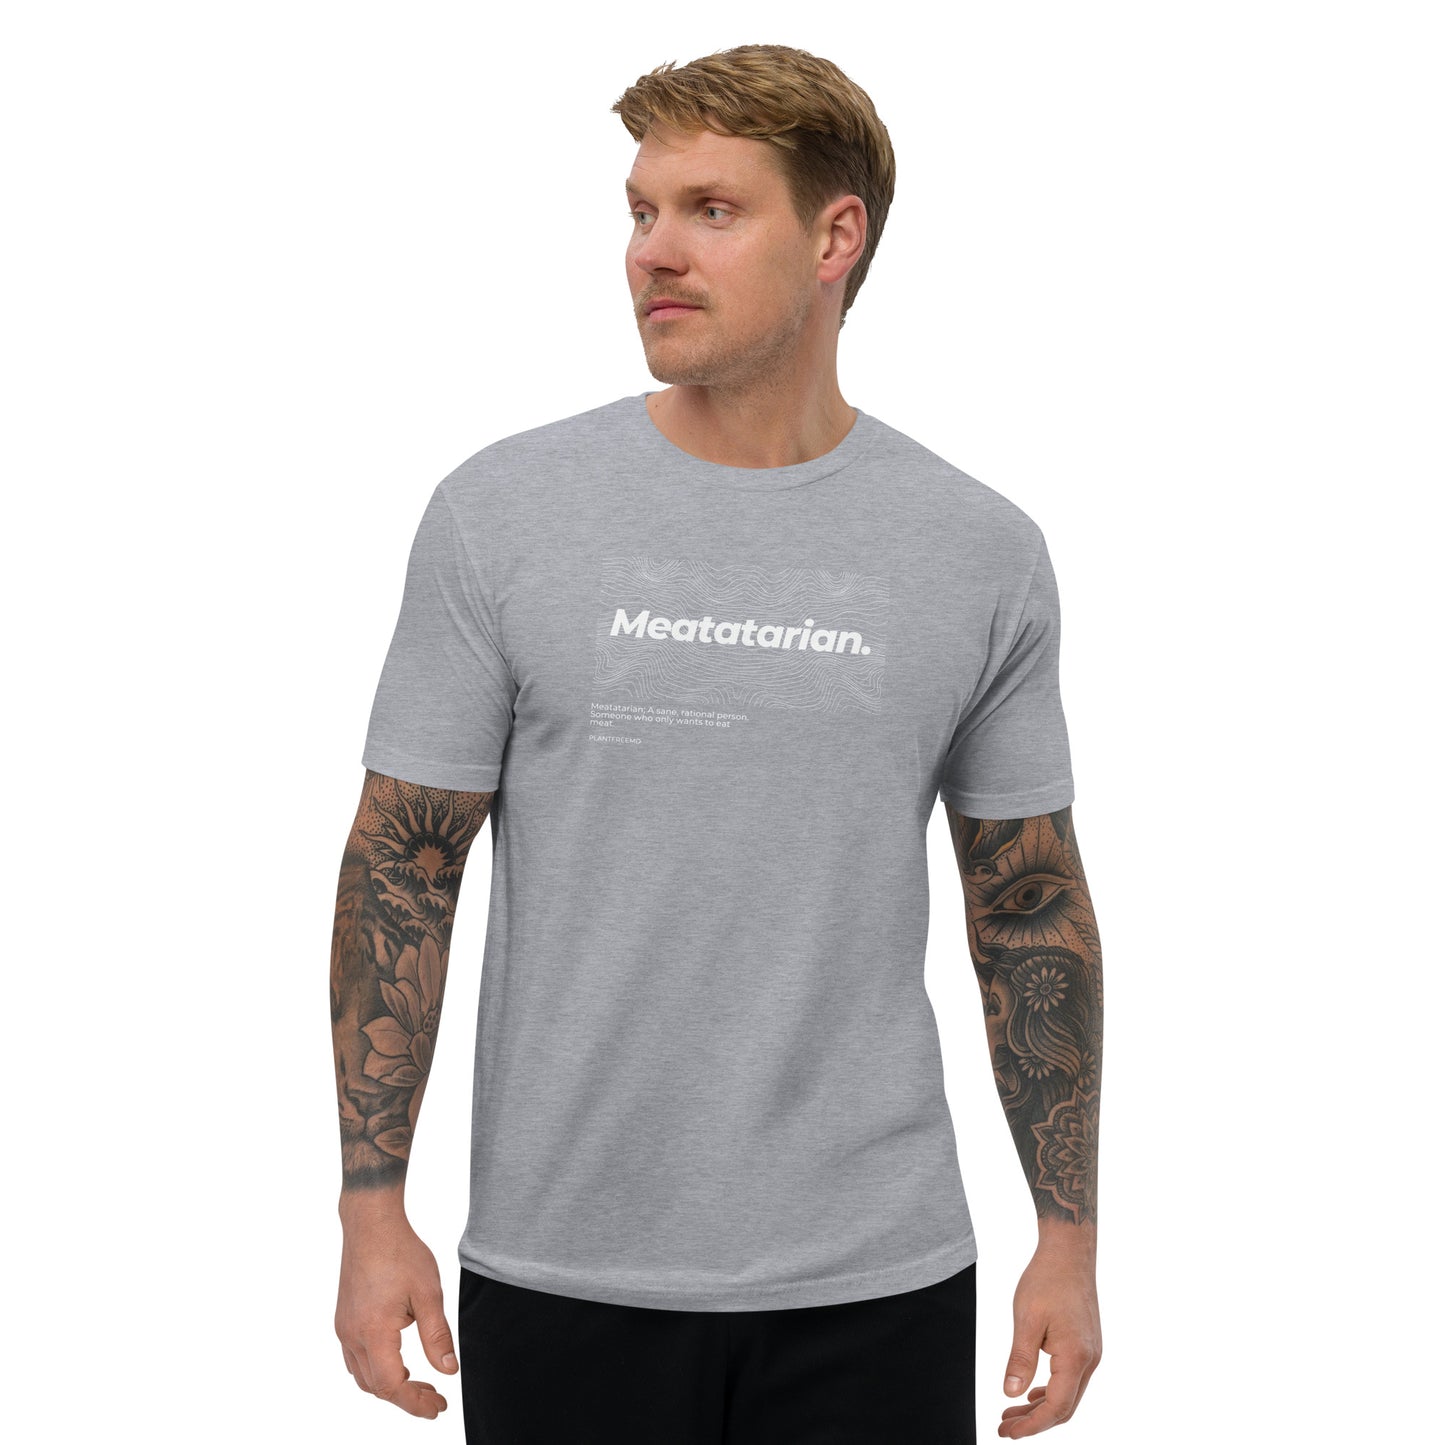 Meatatarian 2 Men's Fitted T-shirt